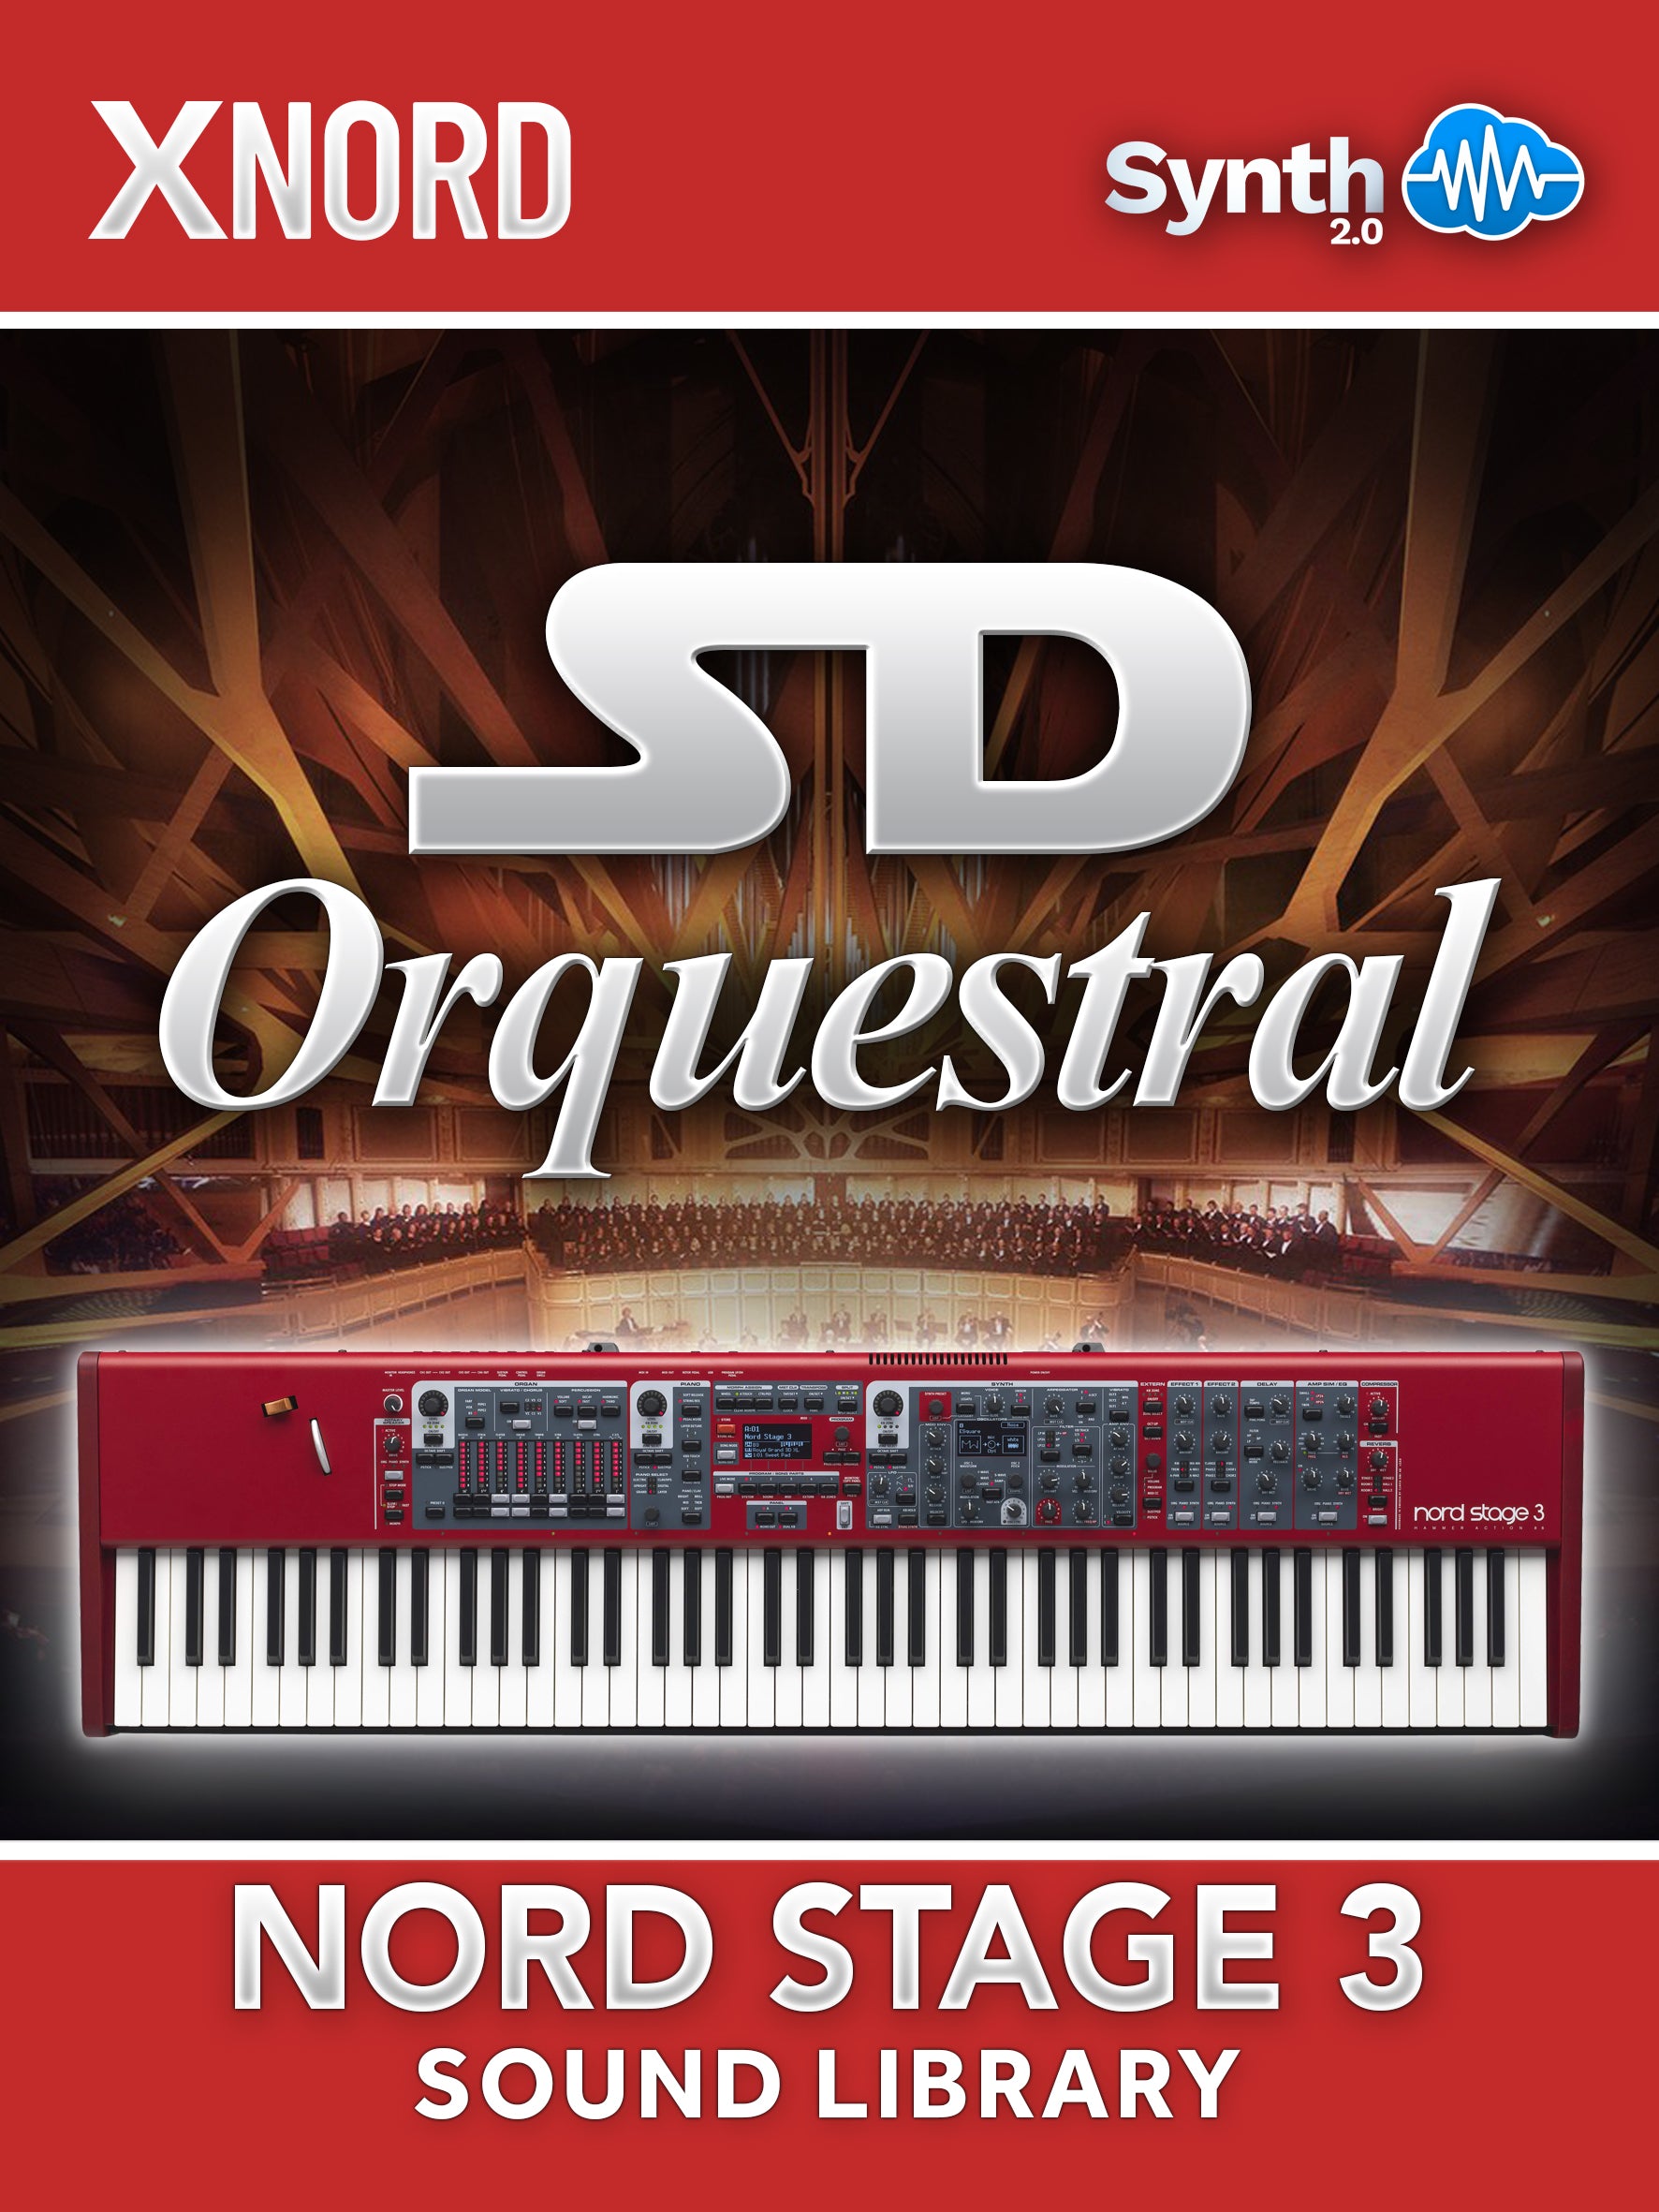 SCL382 - SD Orquestral - Nord Stage 3 ( 38 presets )